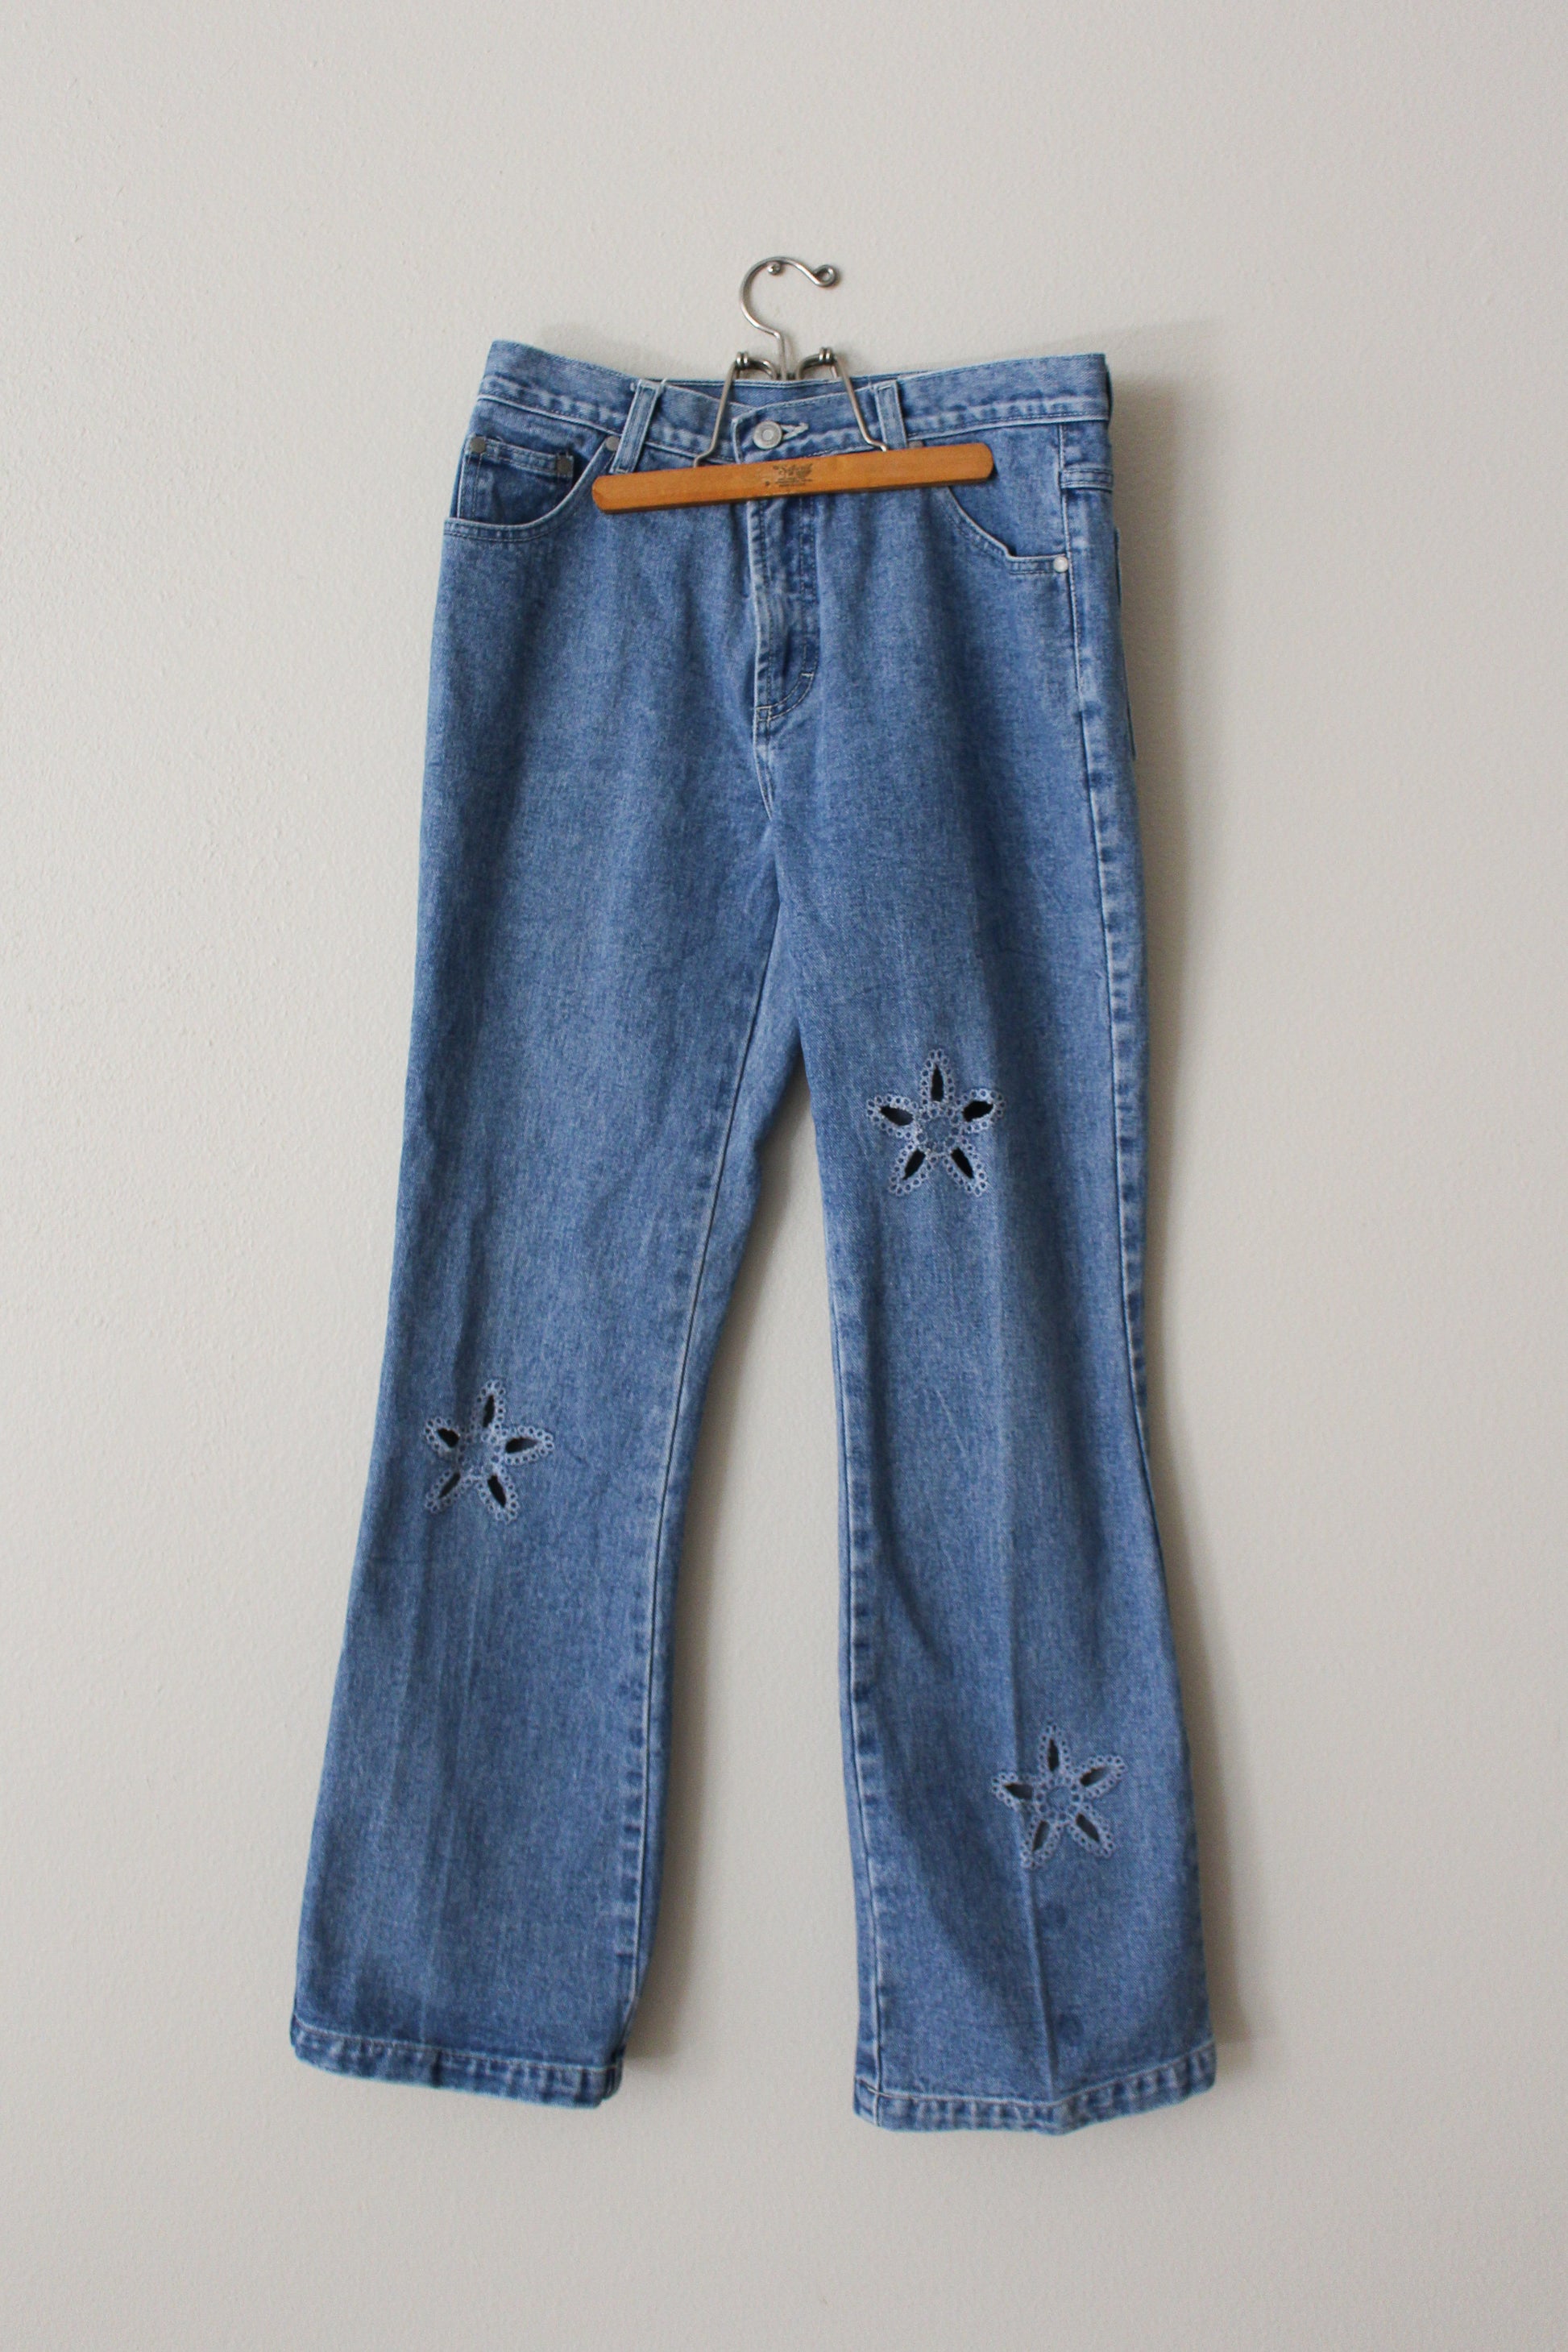 Collectif Floral I Know Flared Jeans in S  Blue high waisted jeans, Pretty  pants, High waisted flare jeans